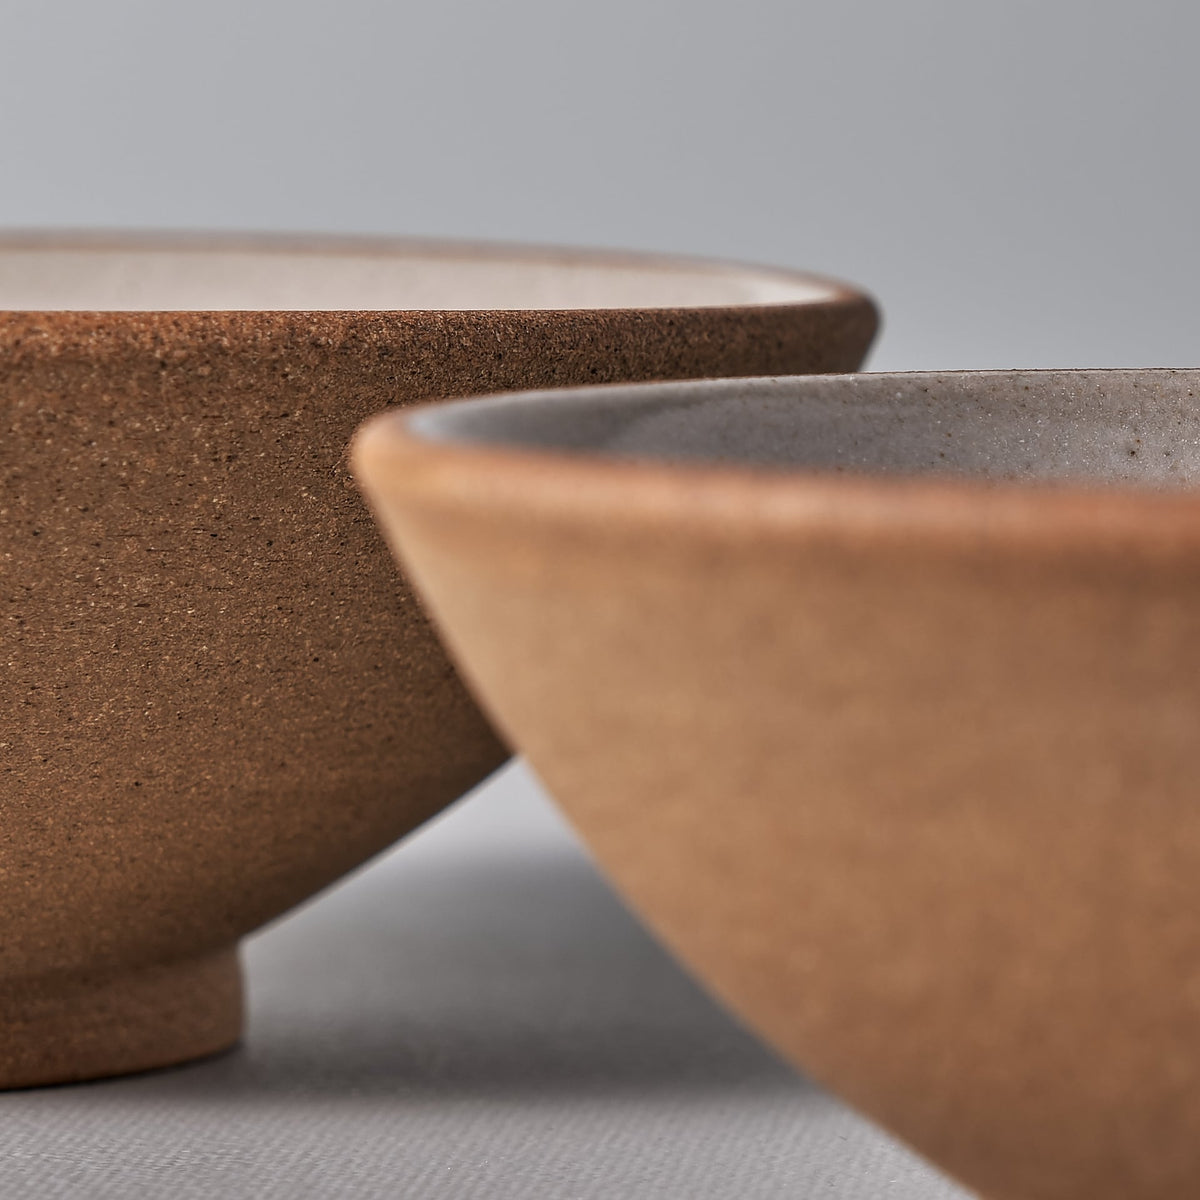 Two Nicola Shuttleworth condiment bowls on a grey surface.